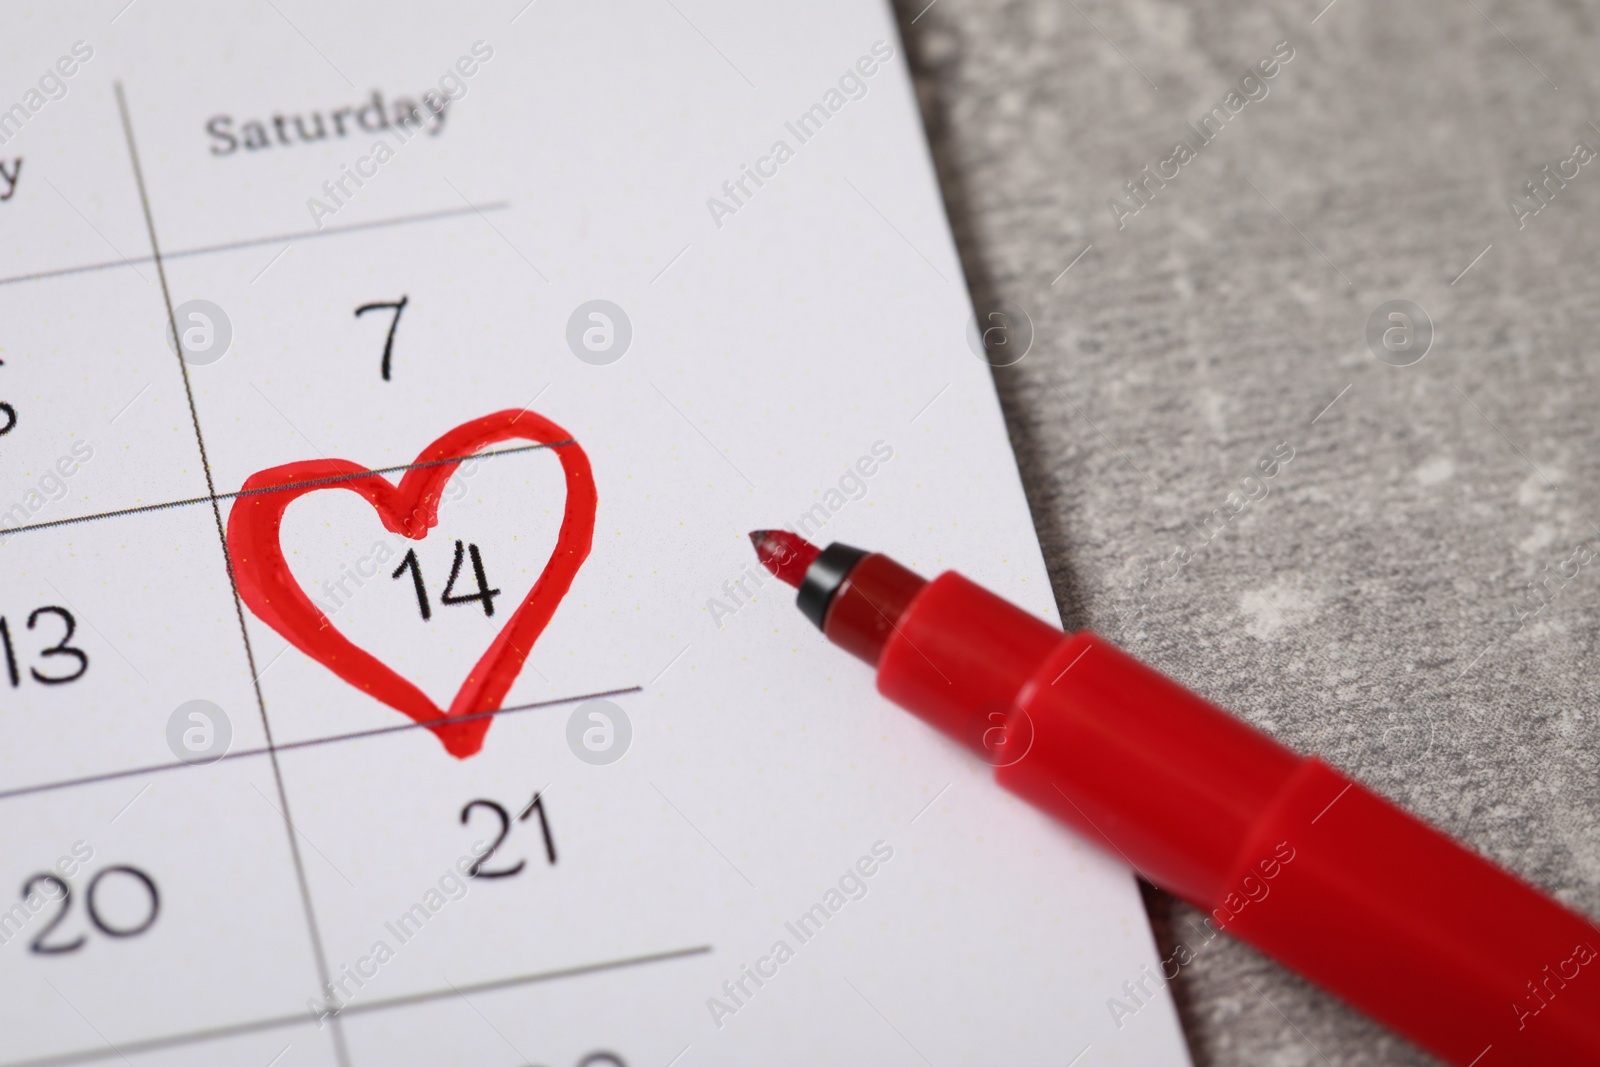 Photo of Calendar with marked Valentine's Day and red felt tip pen on grey table, closeup